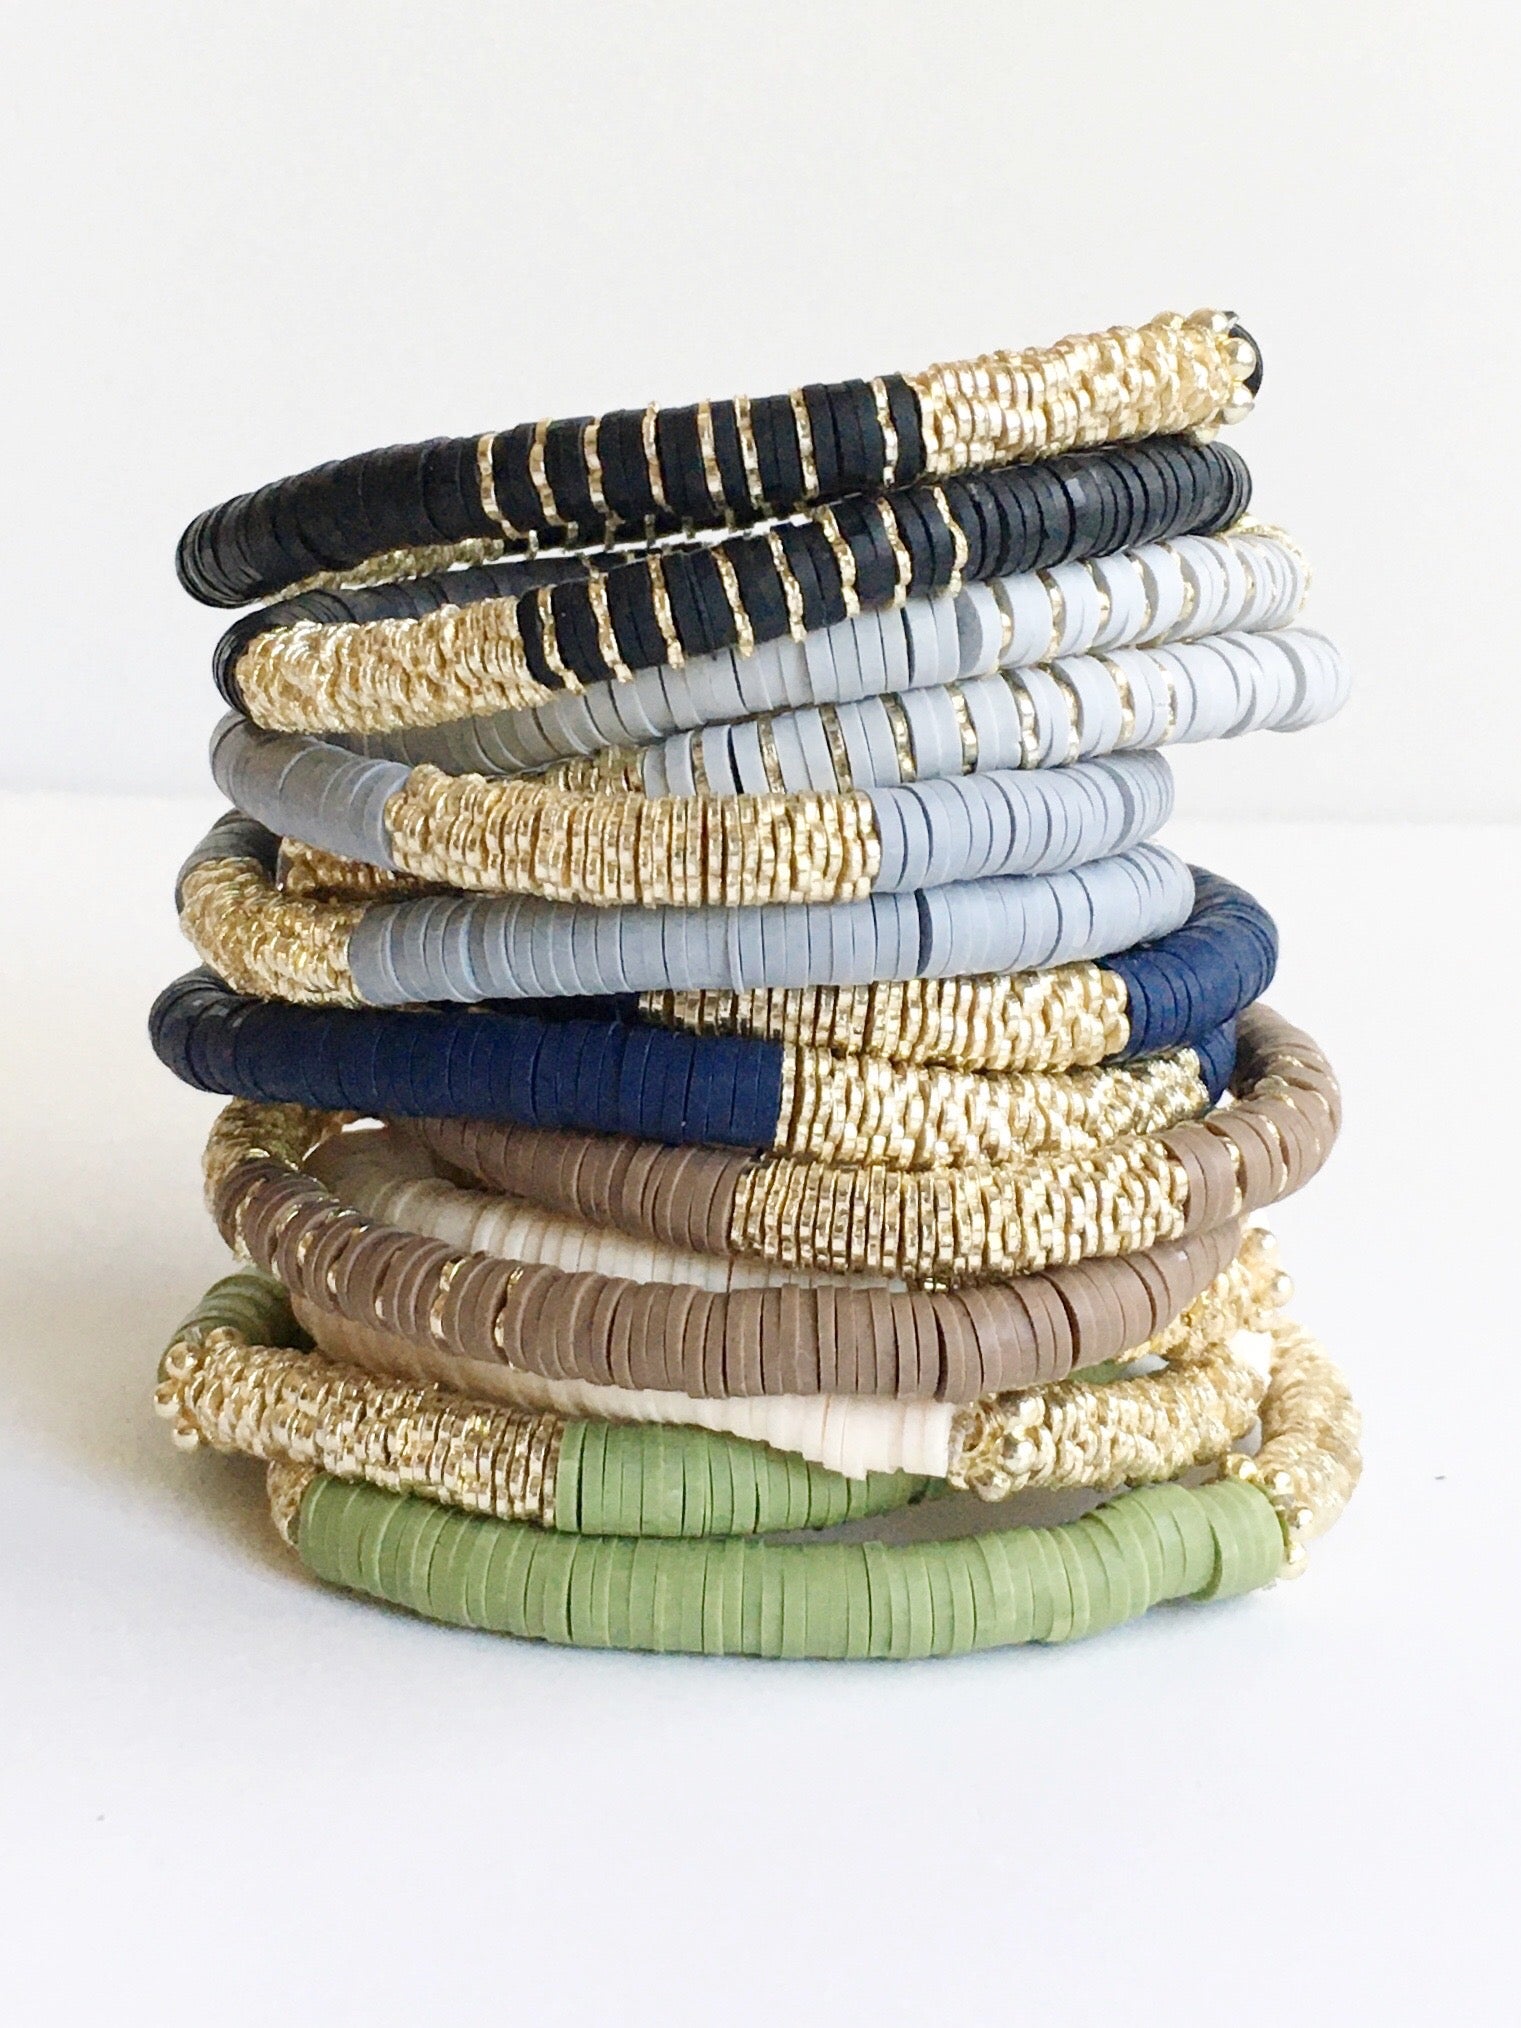 Confetti and Gold Beaded Stretch Bracelets shown in black, grey, white, navy blue, beige, and sage.